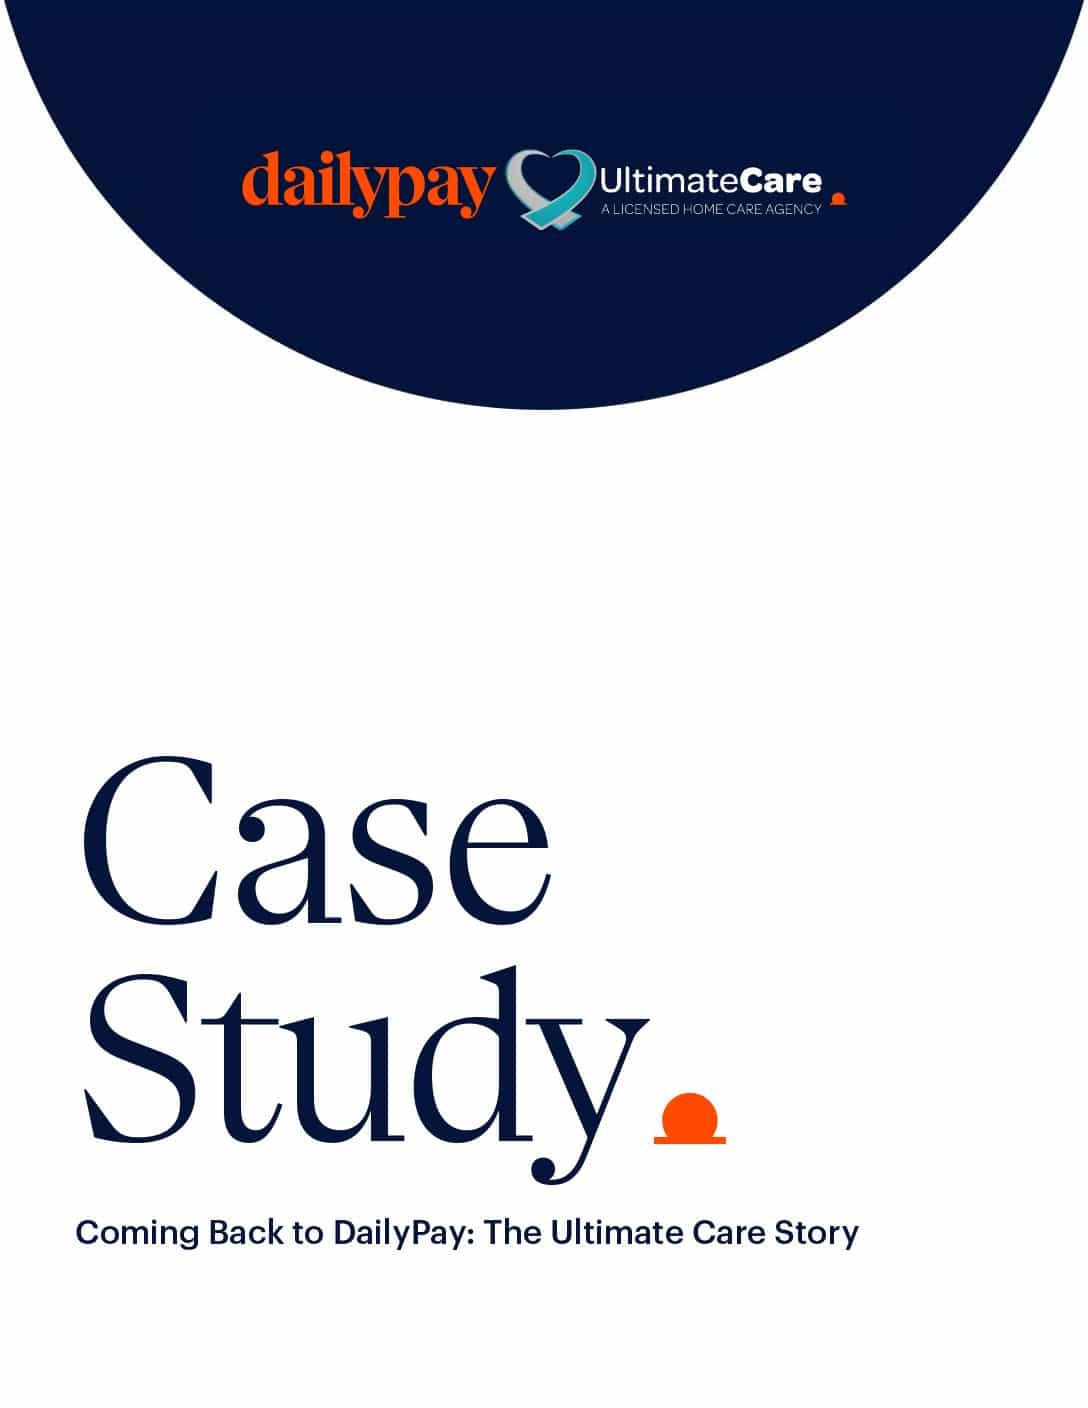 Image of a case study cover page with DailyPay and UltimateCare company logos at the top. The title reads "Case Study" and the subtitle below is "Coming Back to DailyPay: The Ultimate Care Story." The background is white with the top section in dark blue featuring the logos.